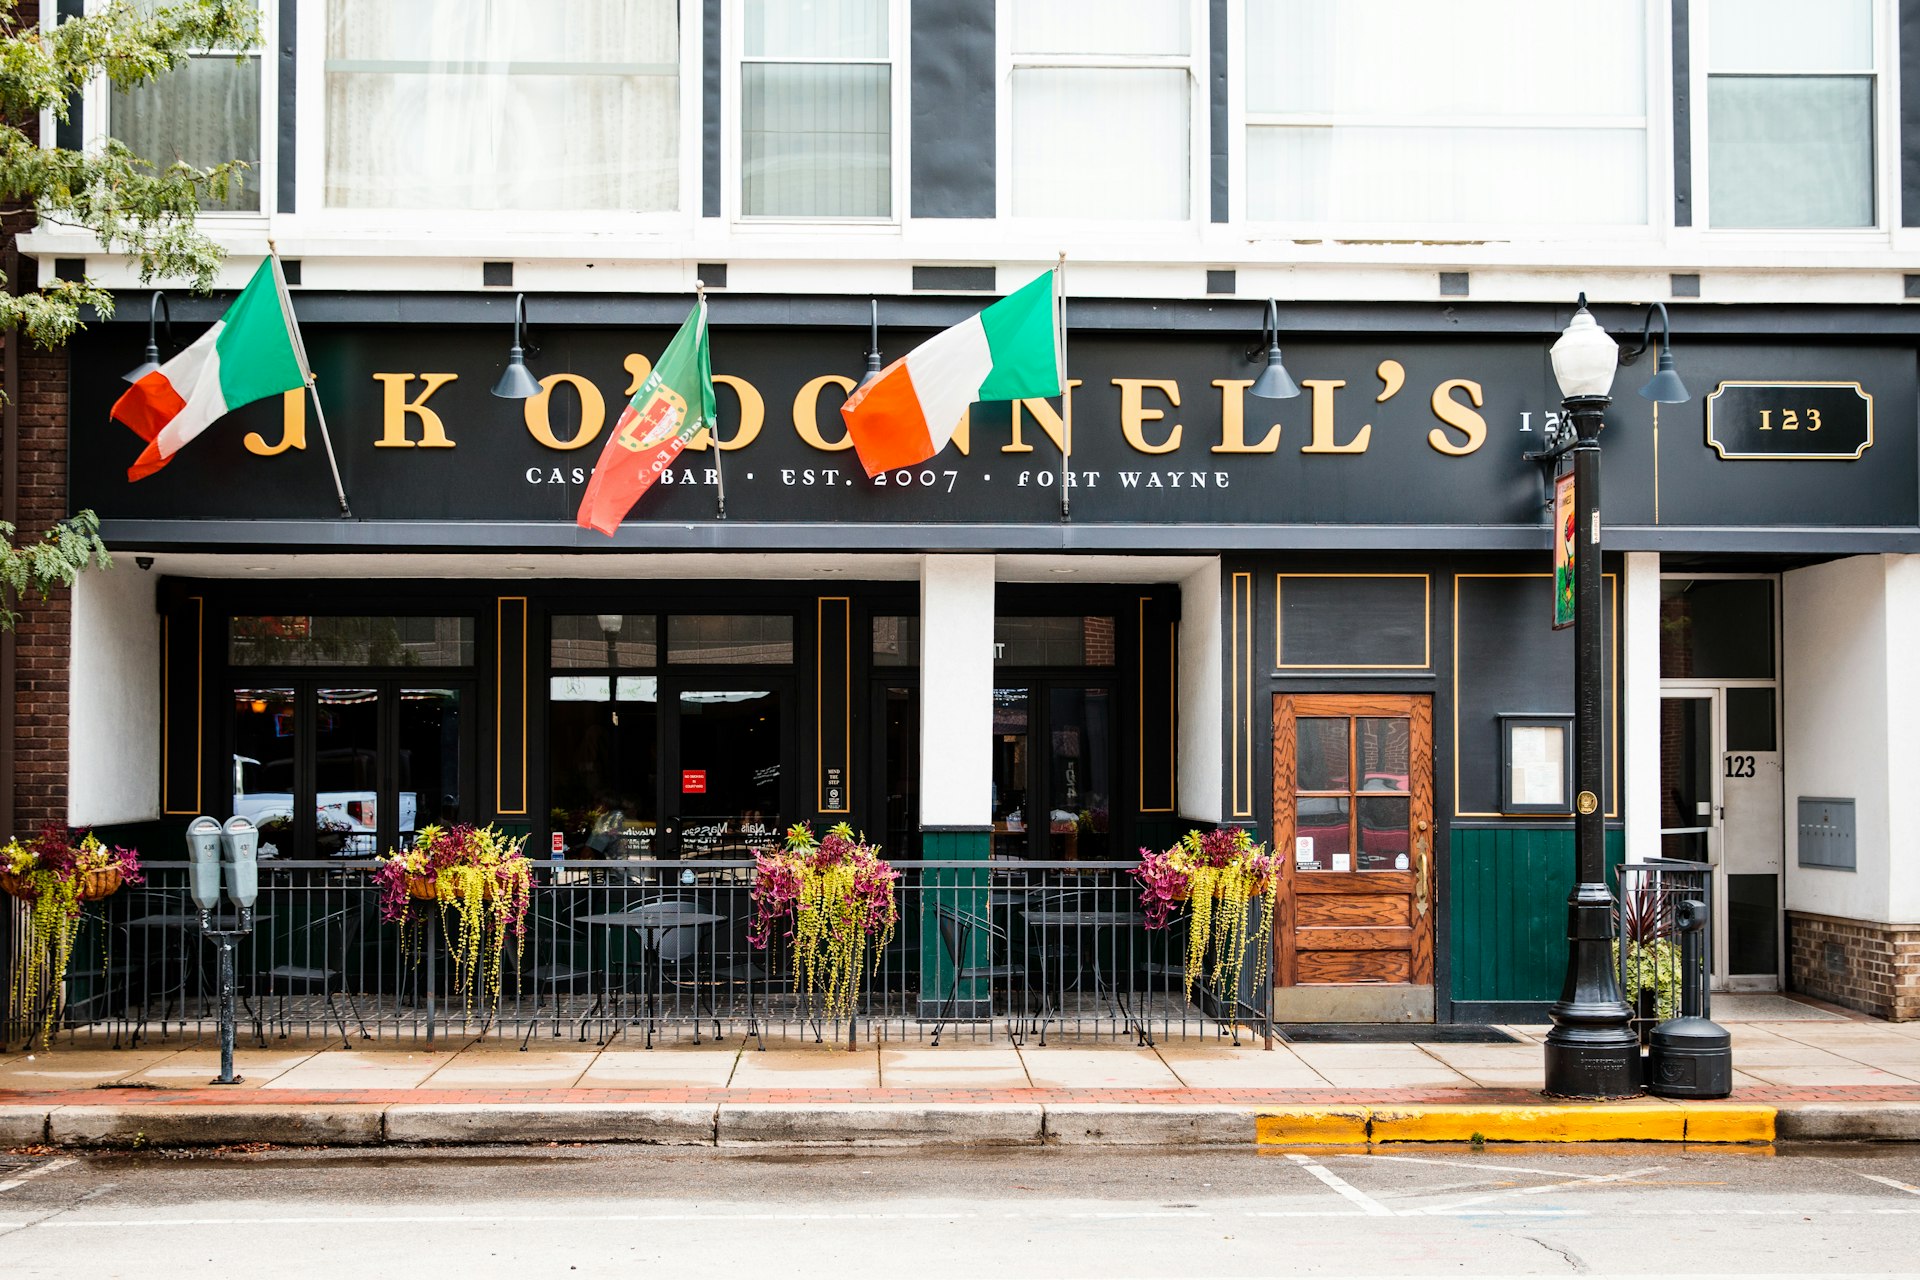 JK O'Donnell's in Fort Wayne, Indiana